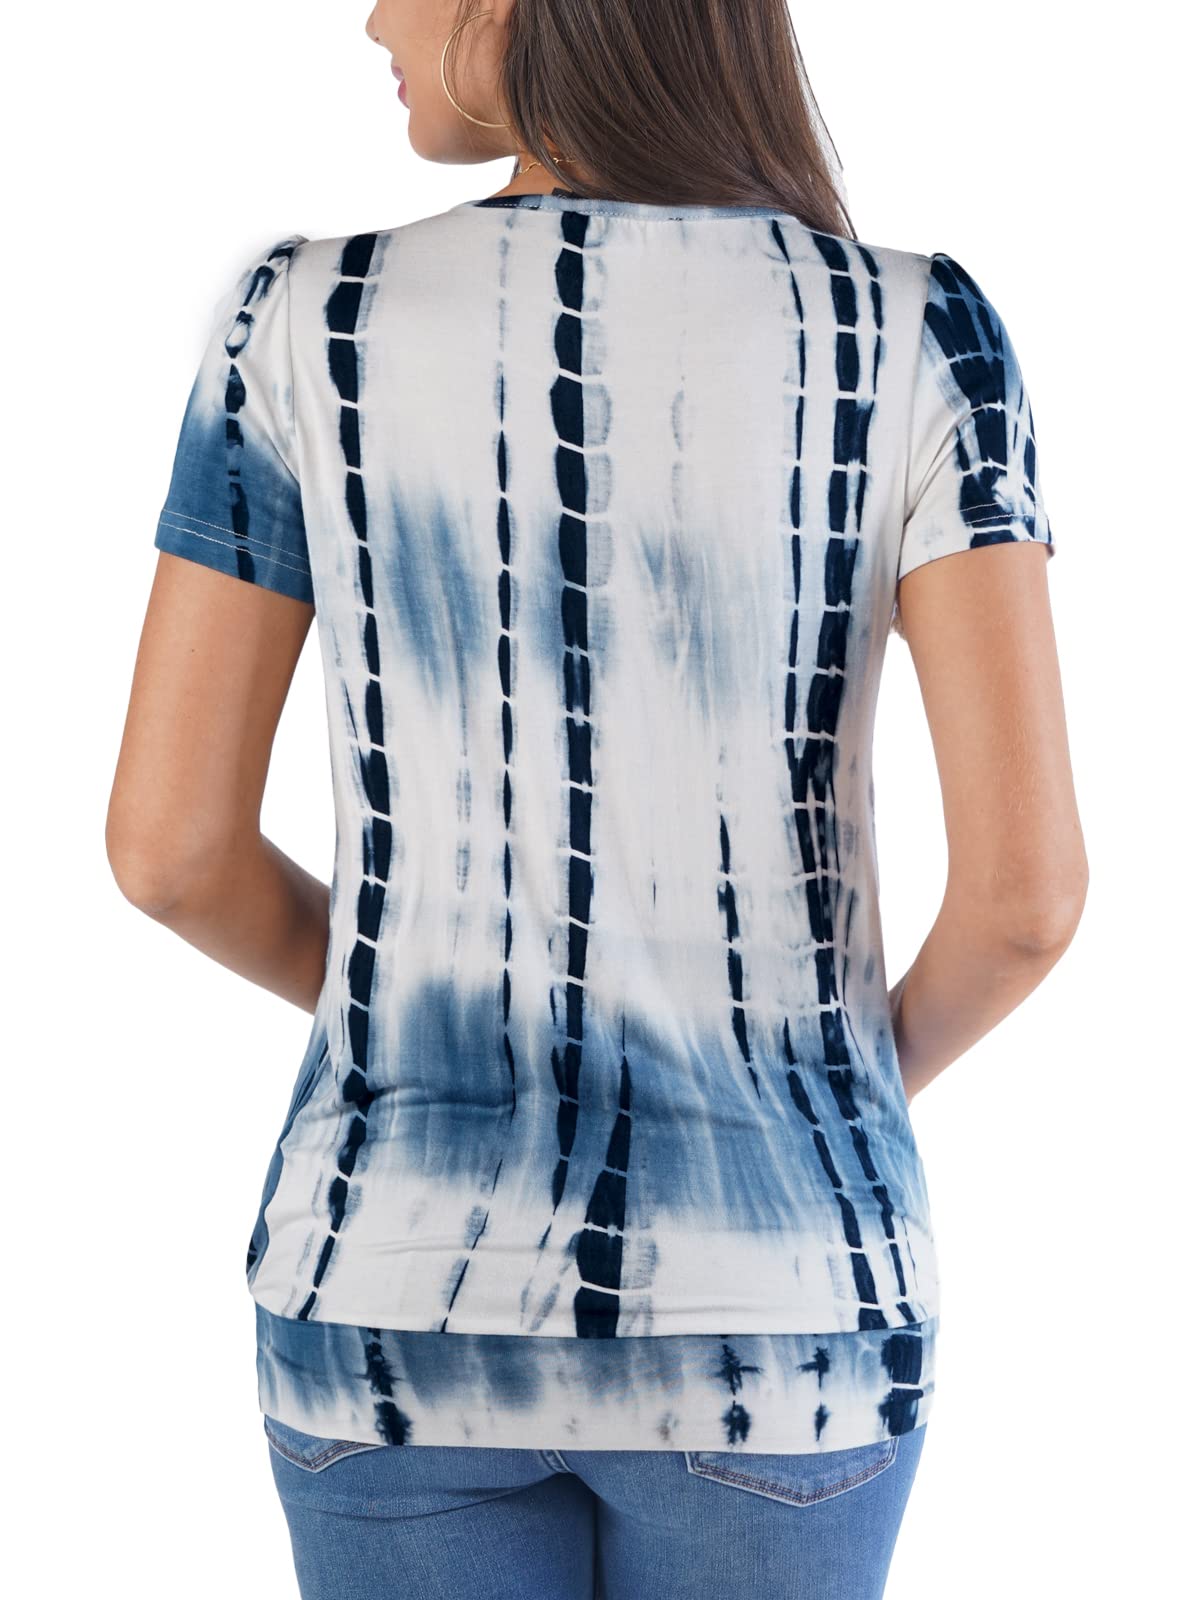 DJT Tie Dye Blue Bamboo Women's Scoop Neck Short Sleeve Pleated Front Blouse Tunic Tops